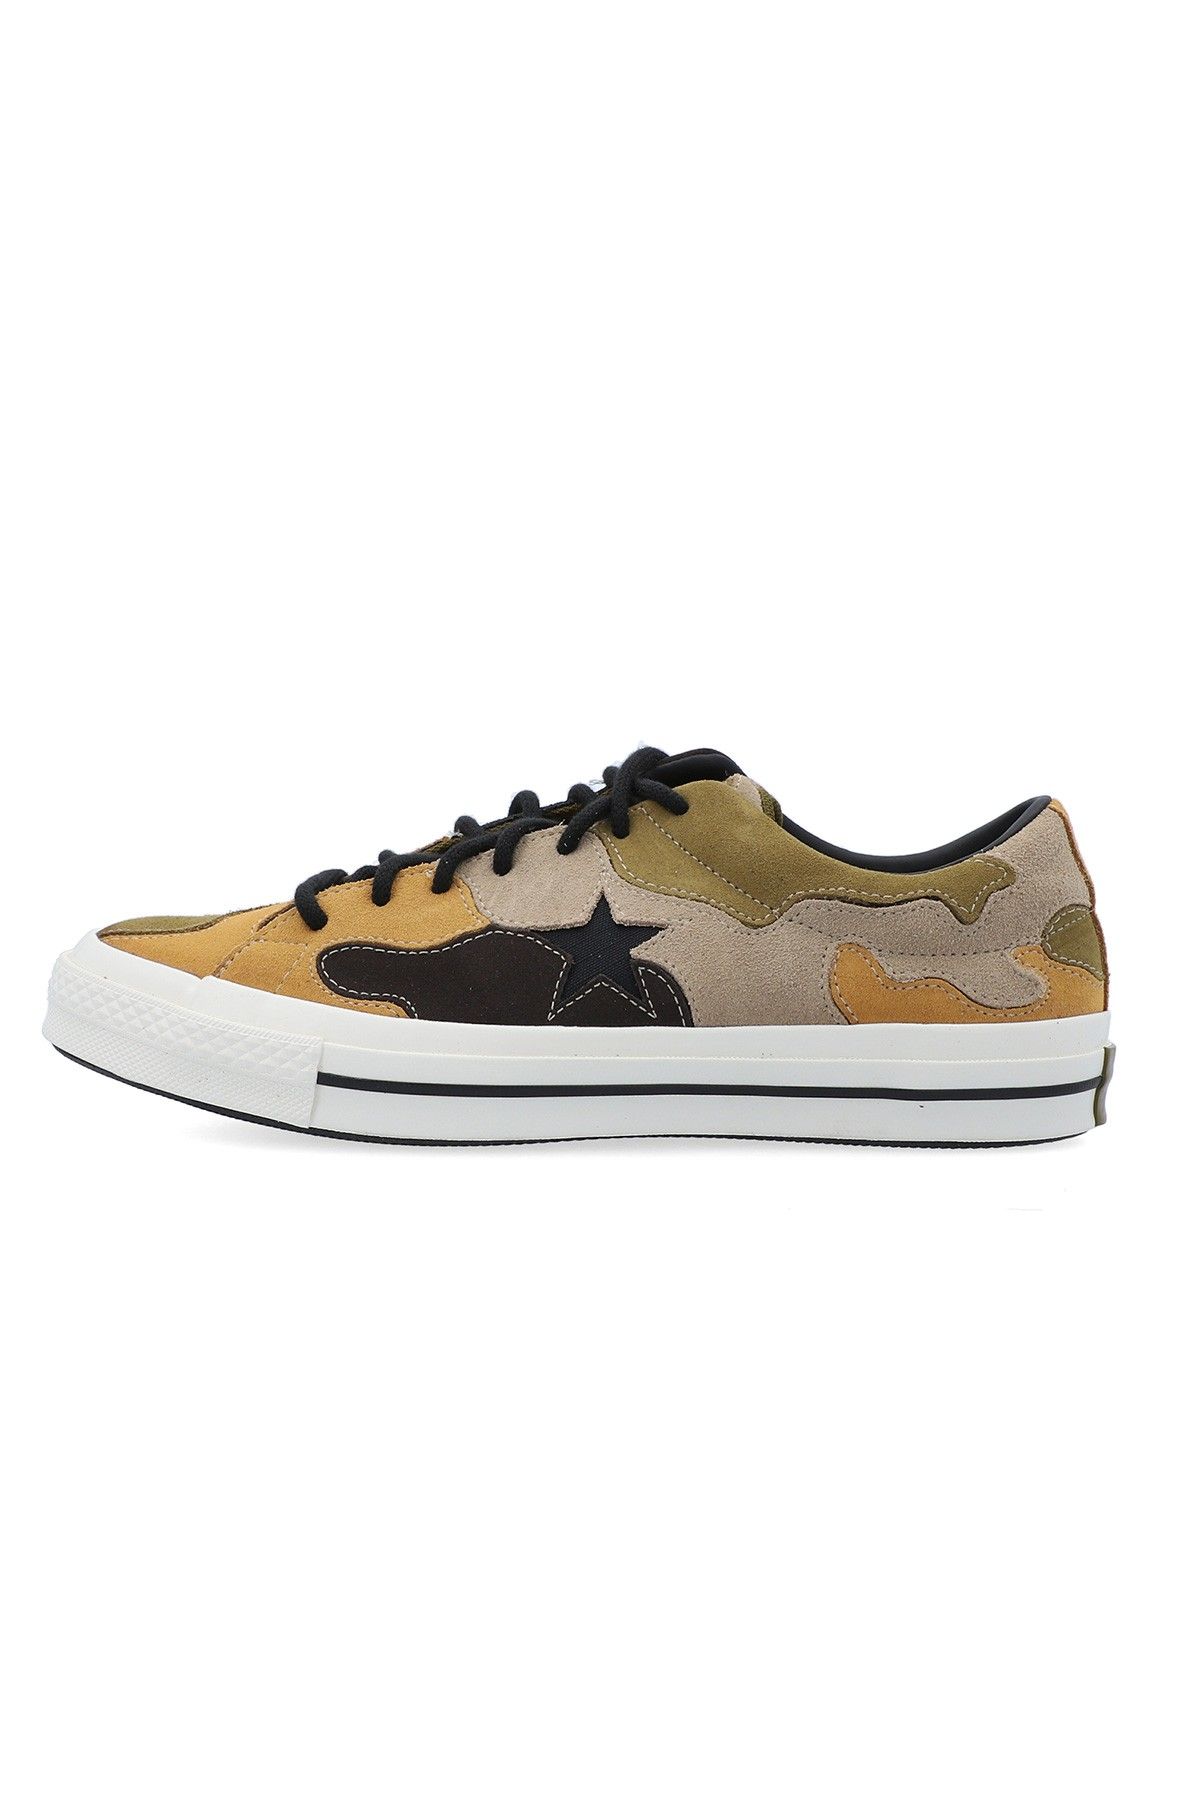 Converse Camo Suede One Star Unisex Sneakers|